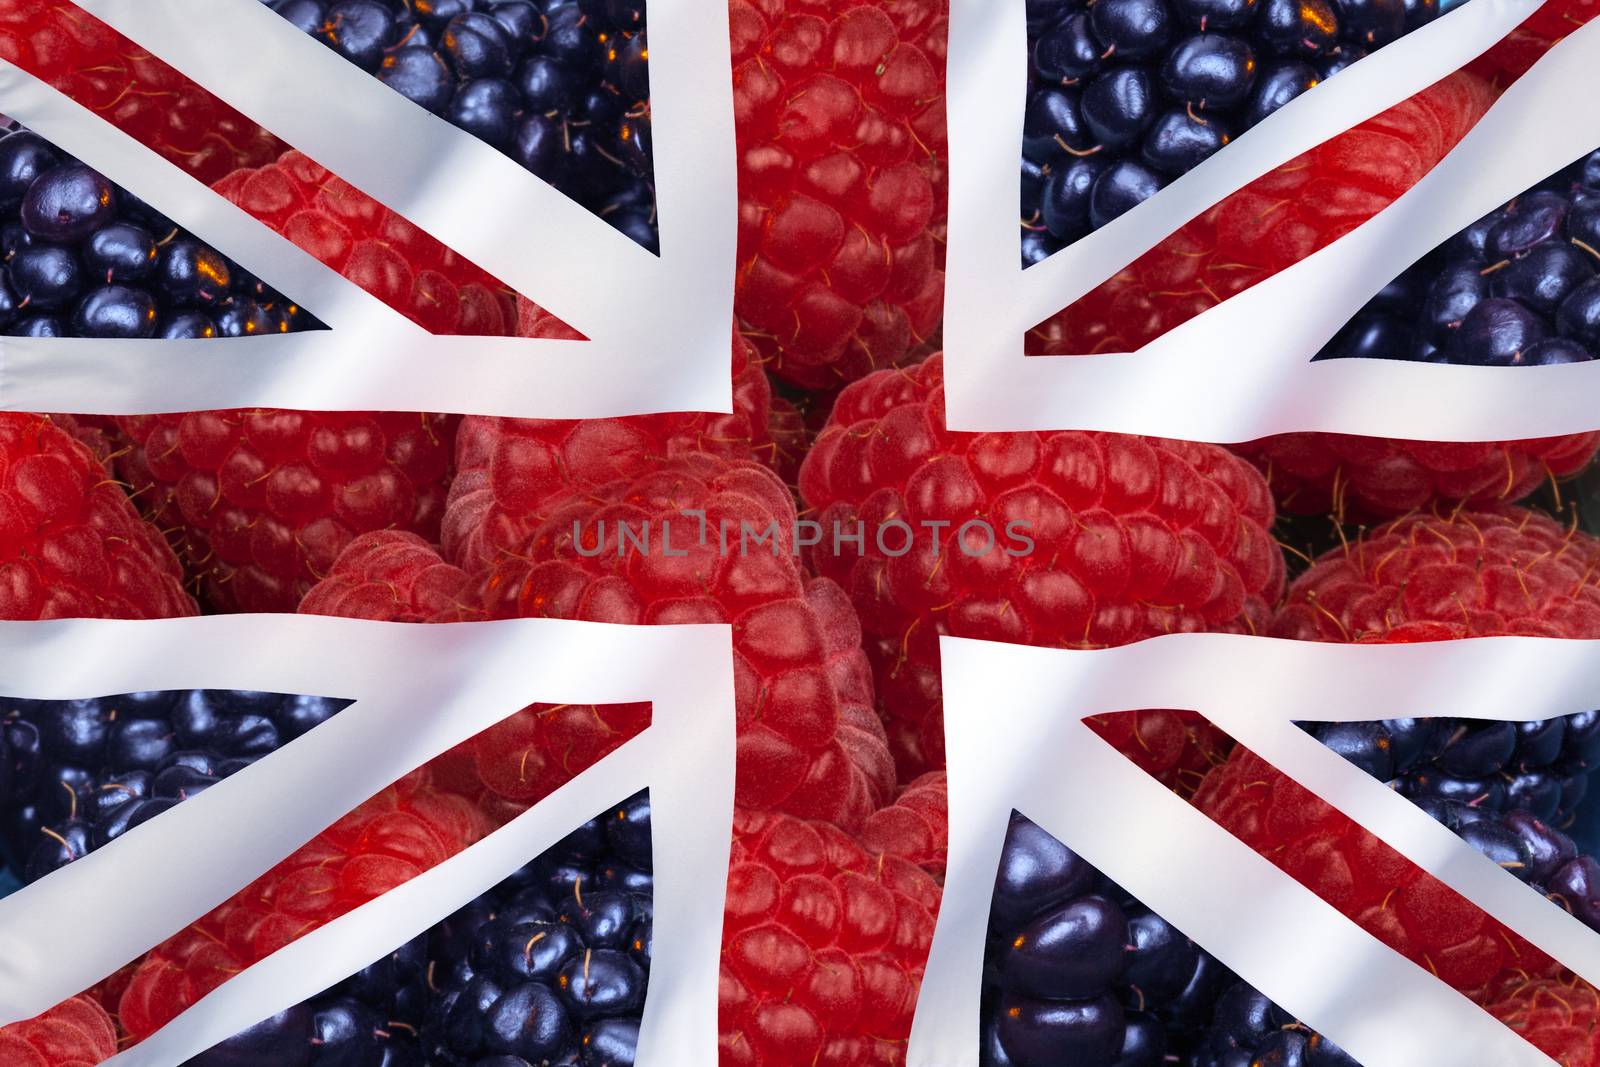 Fruit - Raspberries and blackcurrents - Flag of the United Kingdom of Great Britain and Northern Ireland